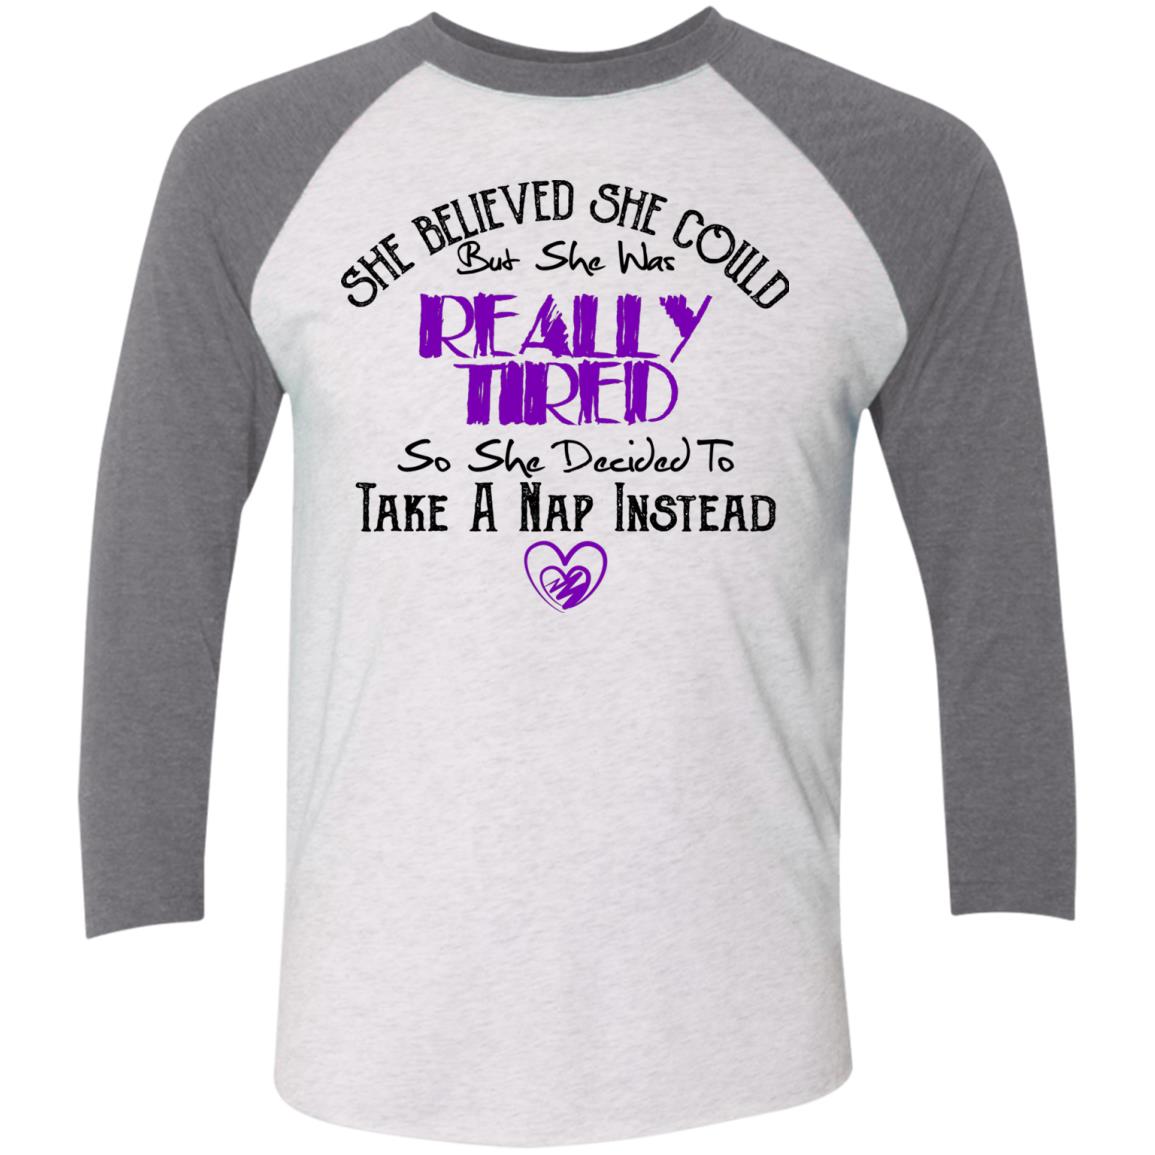 Funny Baseball Raglan T-Shirt - She Believed She Could But She Was Tiered - GoneBold.gift